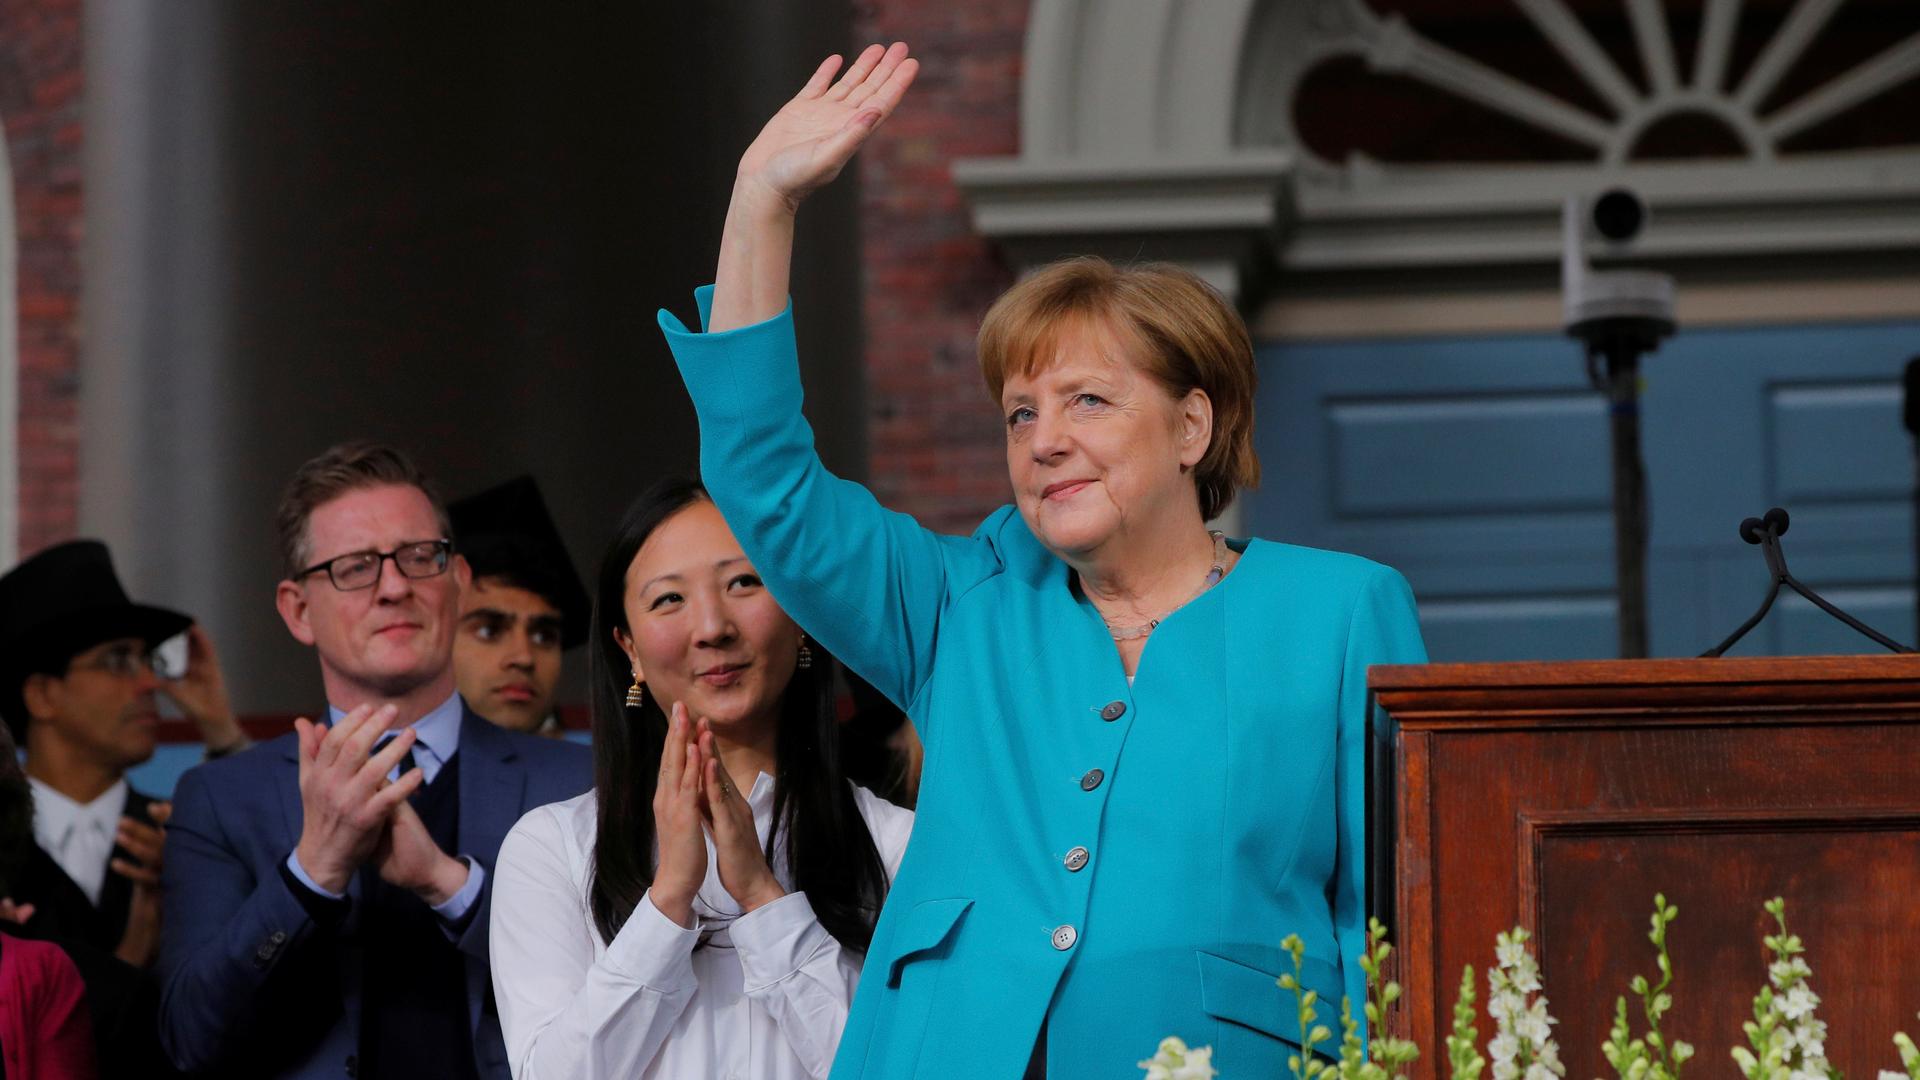 “Tear down the walls of ignorance and narrow-mindedness,” German Chancellor Angela Merkel told graduates at the 368th commencement ceremony at Harvard University in Cambridge, Massachusetts, May 30, 2019.